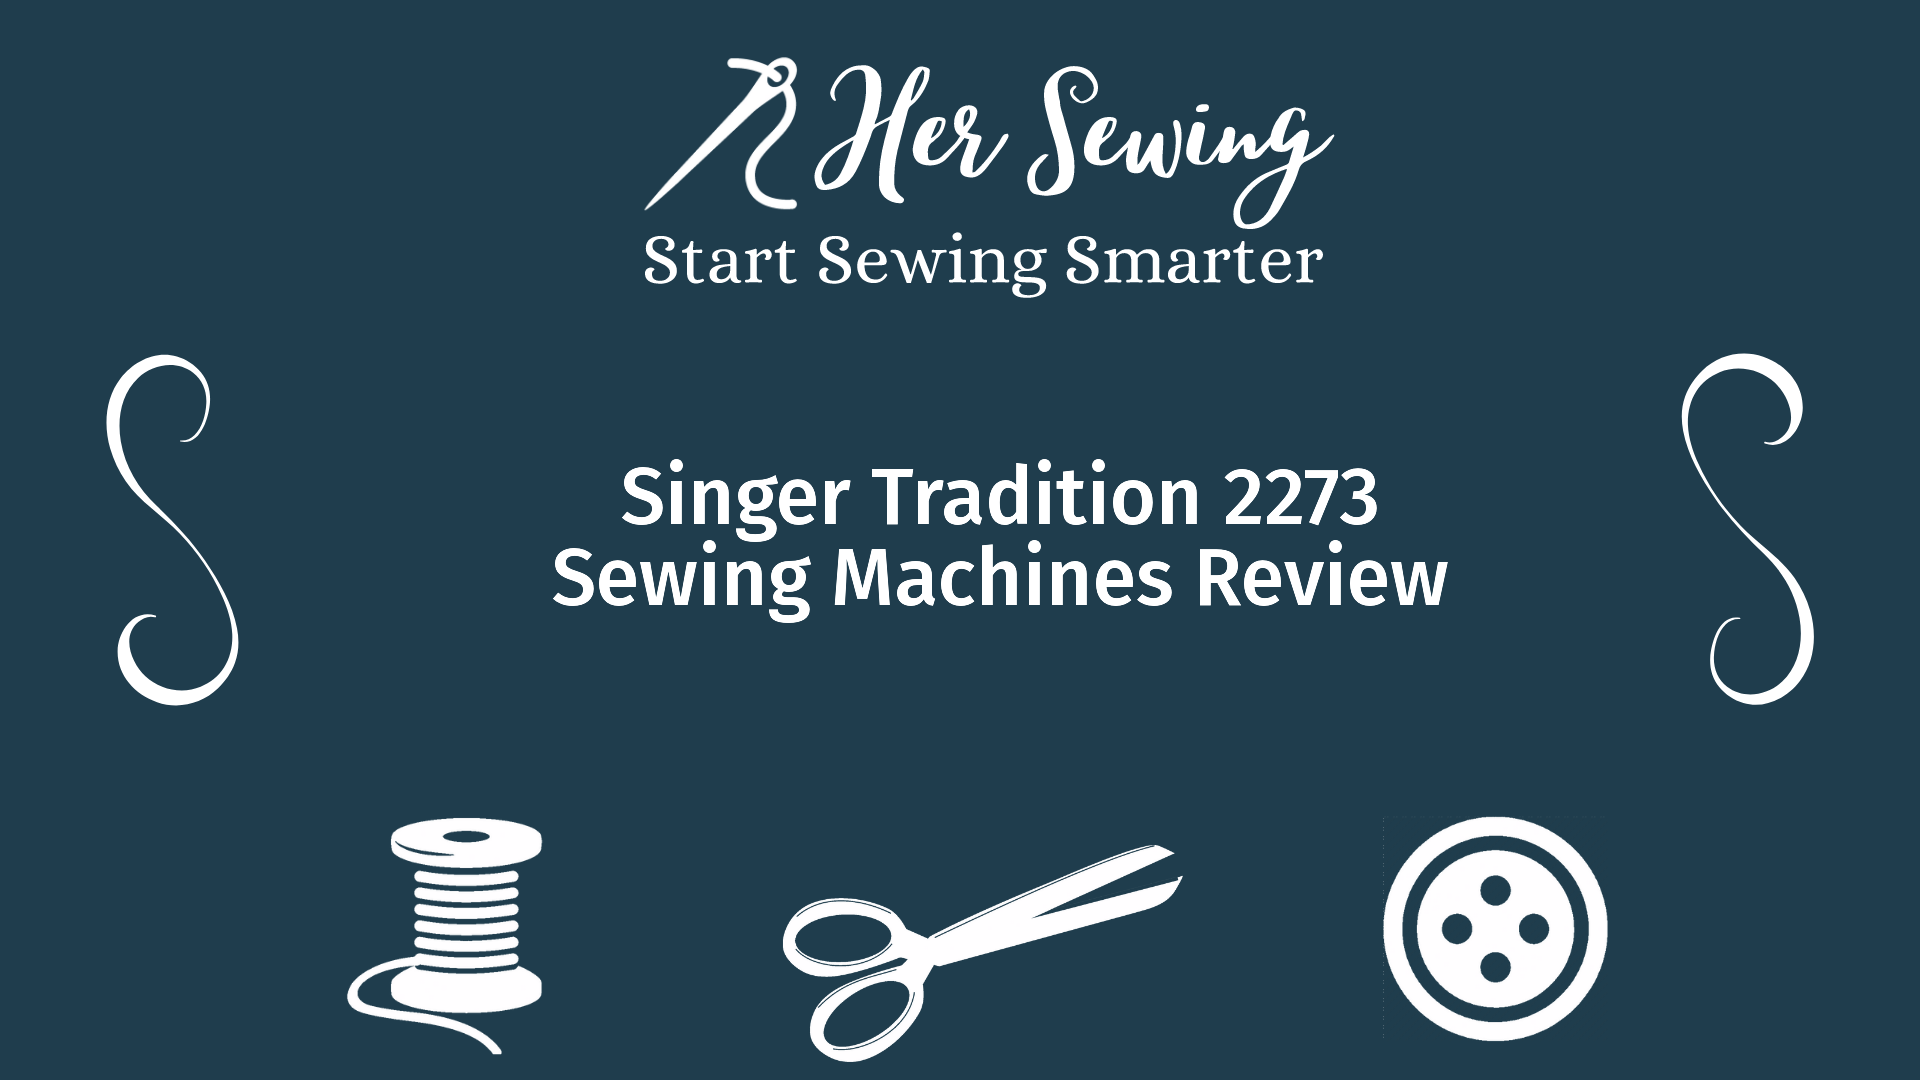 Singer Tradition 2273 Sewing Machines Review